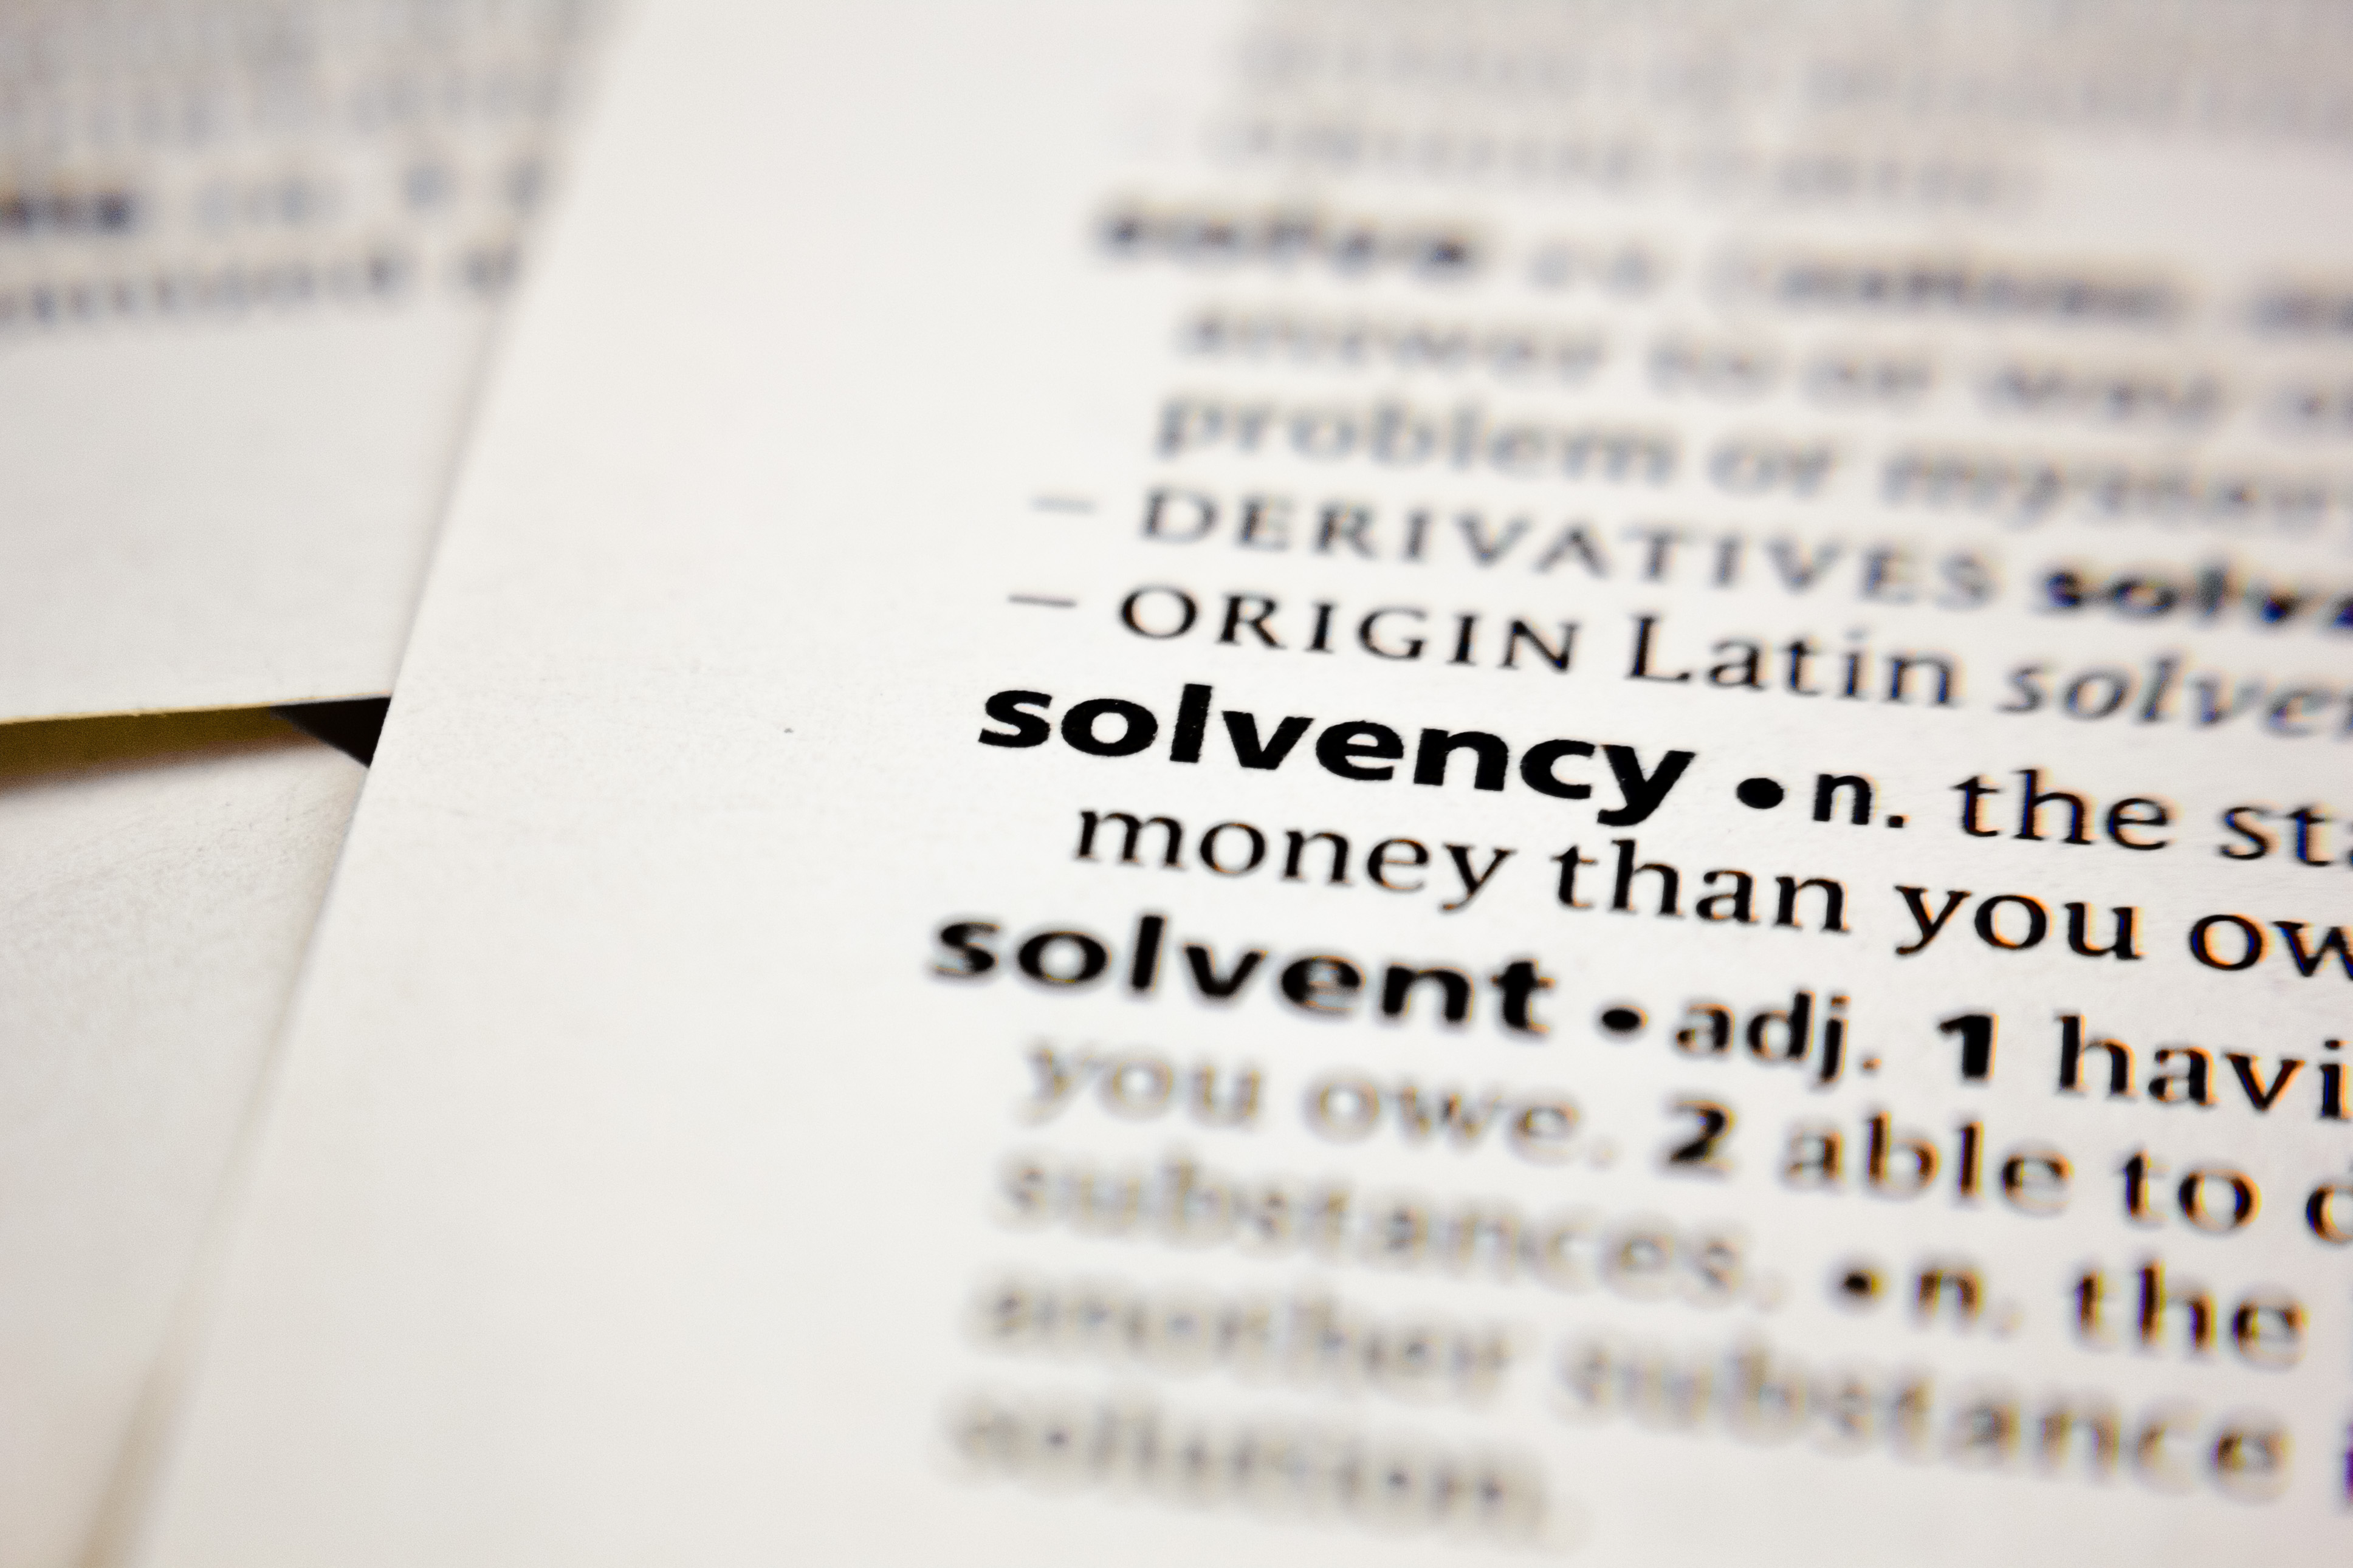 Directors’ Declarations of Solvency: Proceed with Care